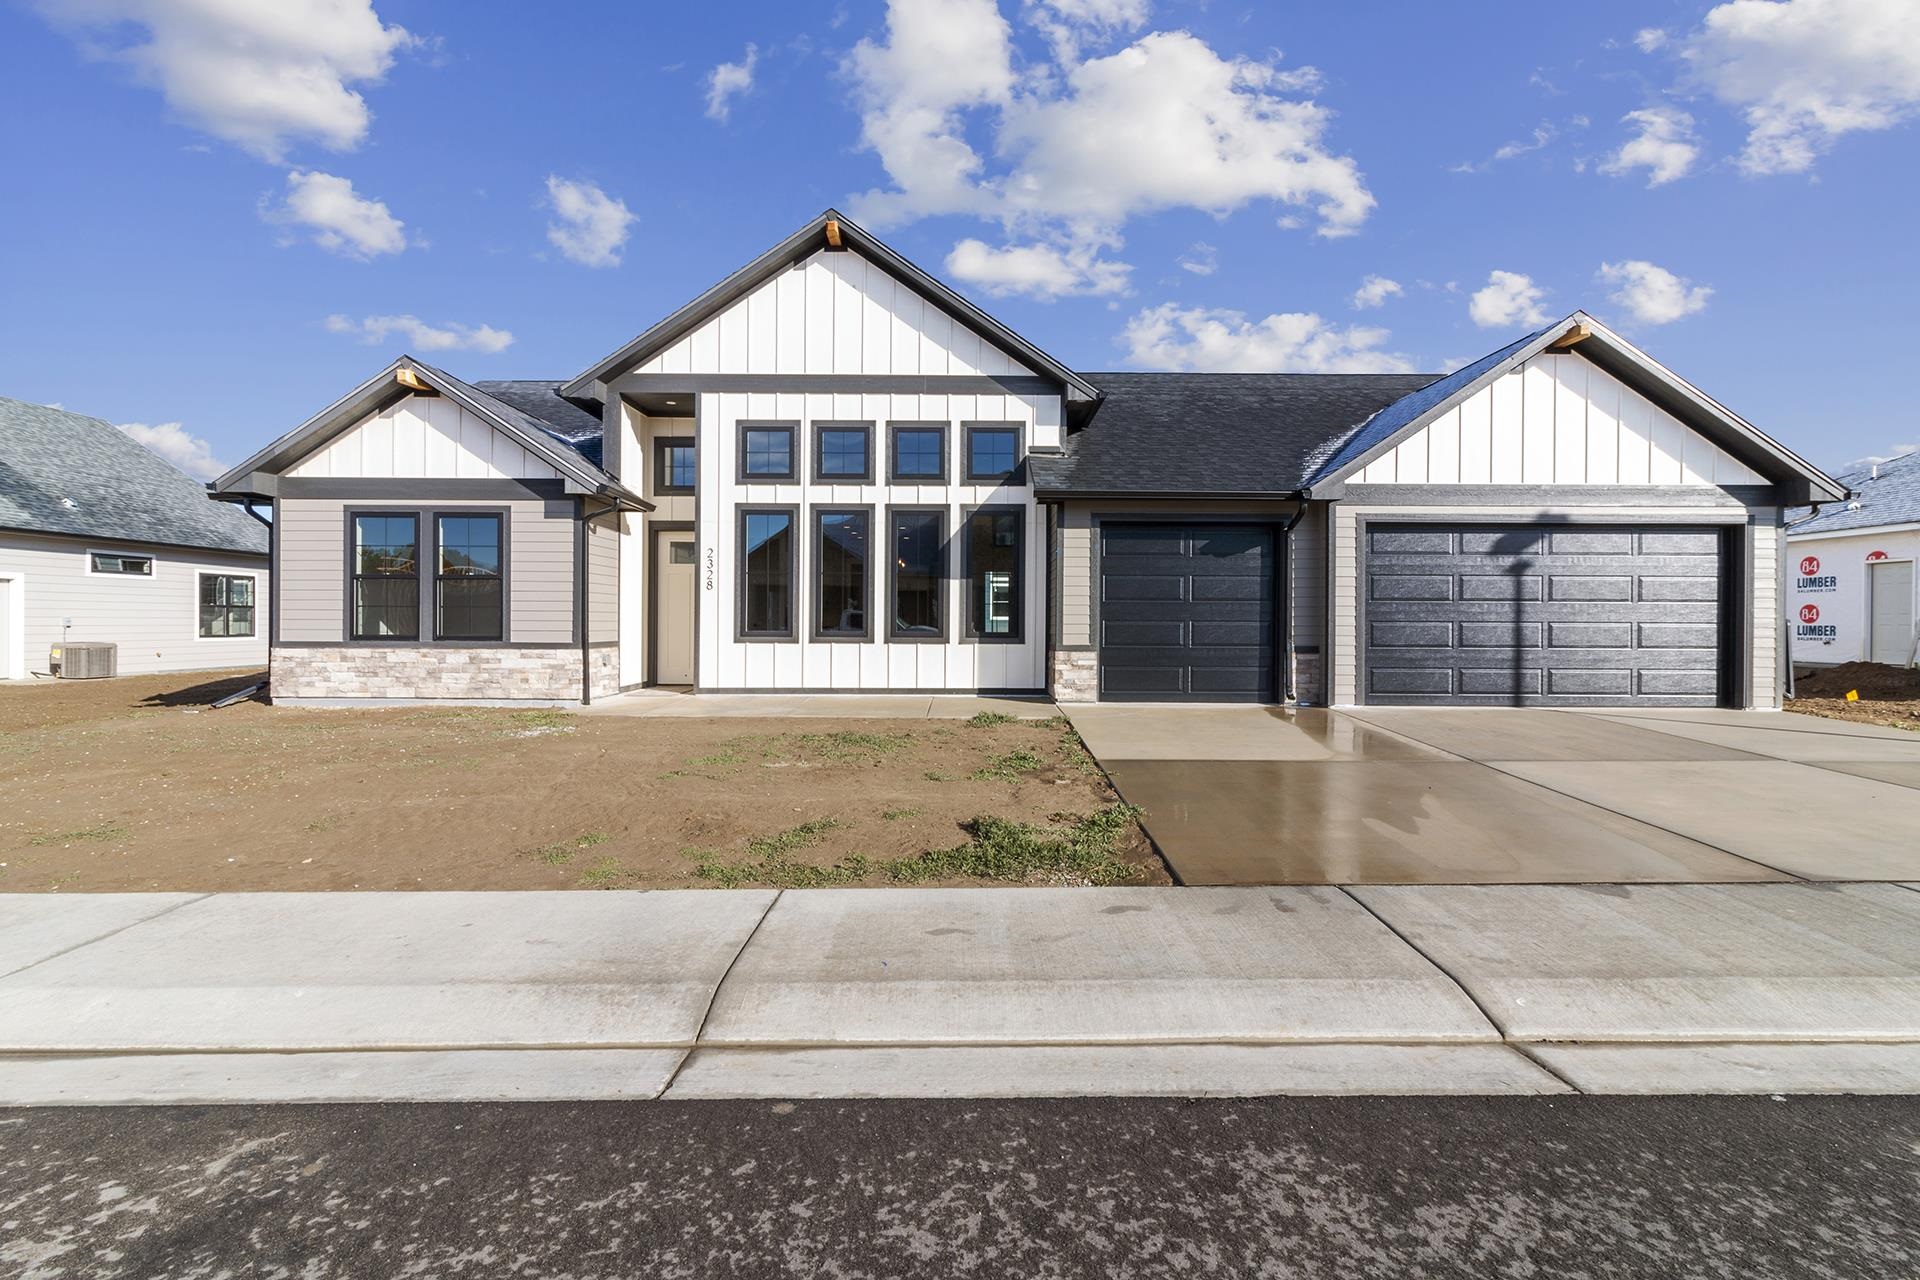 NEW CONSTRUCTION by TreyTyn Homes in Northwest Grand Junction's county-chic subdivision, Silver Spur! This sprawling + functional floorplan has every desirable feature and is sure to WOW! for years to come! A grand front entrance is accented by rows of large picture windows that let plenty of natural sunlight in and create charming curb appeal. The entry leads you into the large open living room with access to three guest/additional bedrooms on the west side of the home. Front bedroom can be used as office/flex space, if desired, and is adjacent to the full bathroom, complete with tile-surround walk-in shower. The two bedrooms on the northwest side of the home share a jack-and-jill bathroom, with dual vanities and tile-surround tub/shower combo. Chef's kitchen offers plenty of upgraded cabinetry, granite countertops, large center island, spacious pantry for plenty of additional storage space and eat-in dining room space -- enjoy the large open space for entertaining guests for years to come! Split-floor plan puts the primary suite secluded on the east side of the home and features a spa-like en-suite bathroom with dual vanities, walk-in shower and private lavatory. Oversized walk-in closet has convenient walk-through access to the laundry room, which can be closed off from the mud room entrance through the garage for additional privacy! Large backyard to enjoy incredible Grand Valley views from the covered patio and plenty of RV parking space! Located in the HIGHLY desired Appleton/Fruita school district and conveniently located near area shopping, restaurants and entertainment! MUST SEE this spectacular property TODAY!